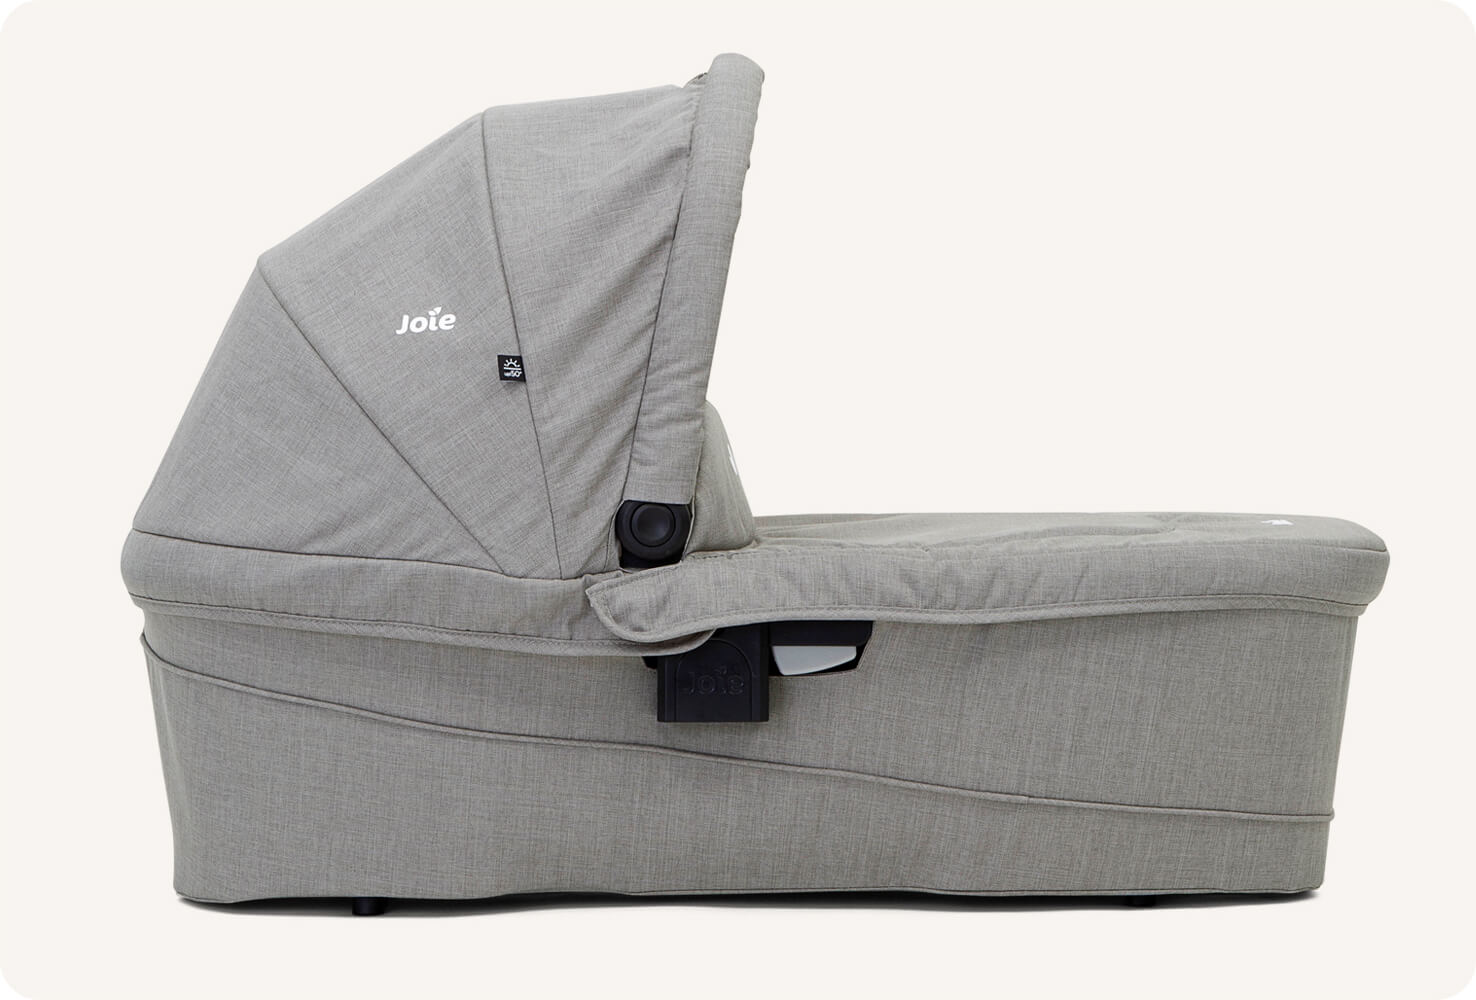  Joie Ramble xl carry cot in light grey on side angle. 